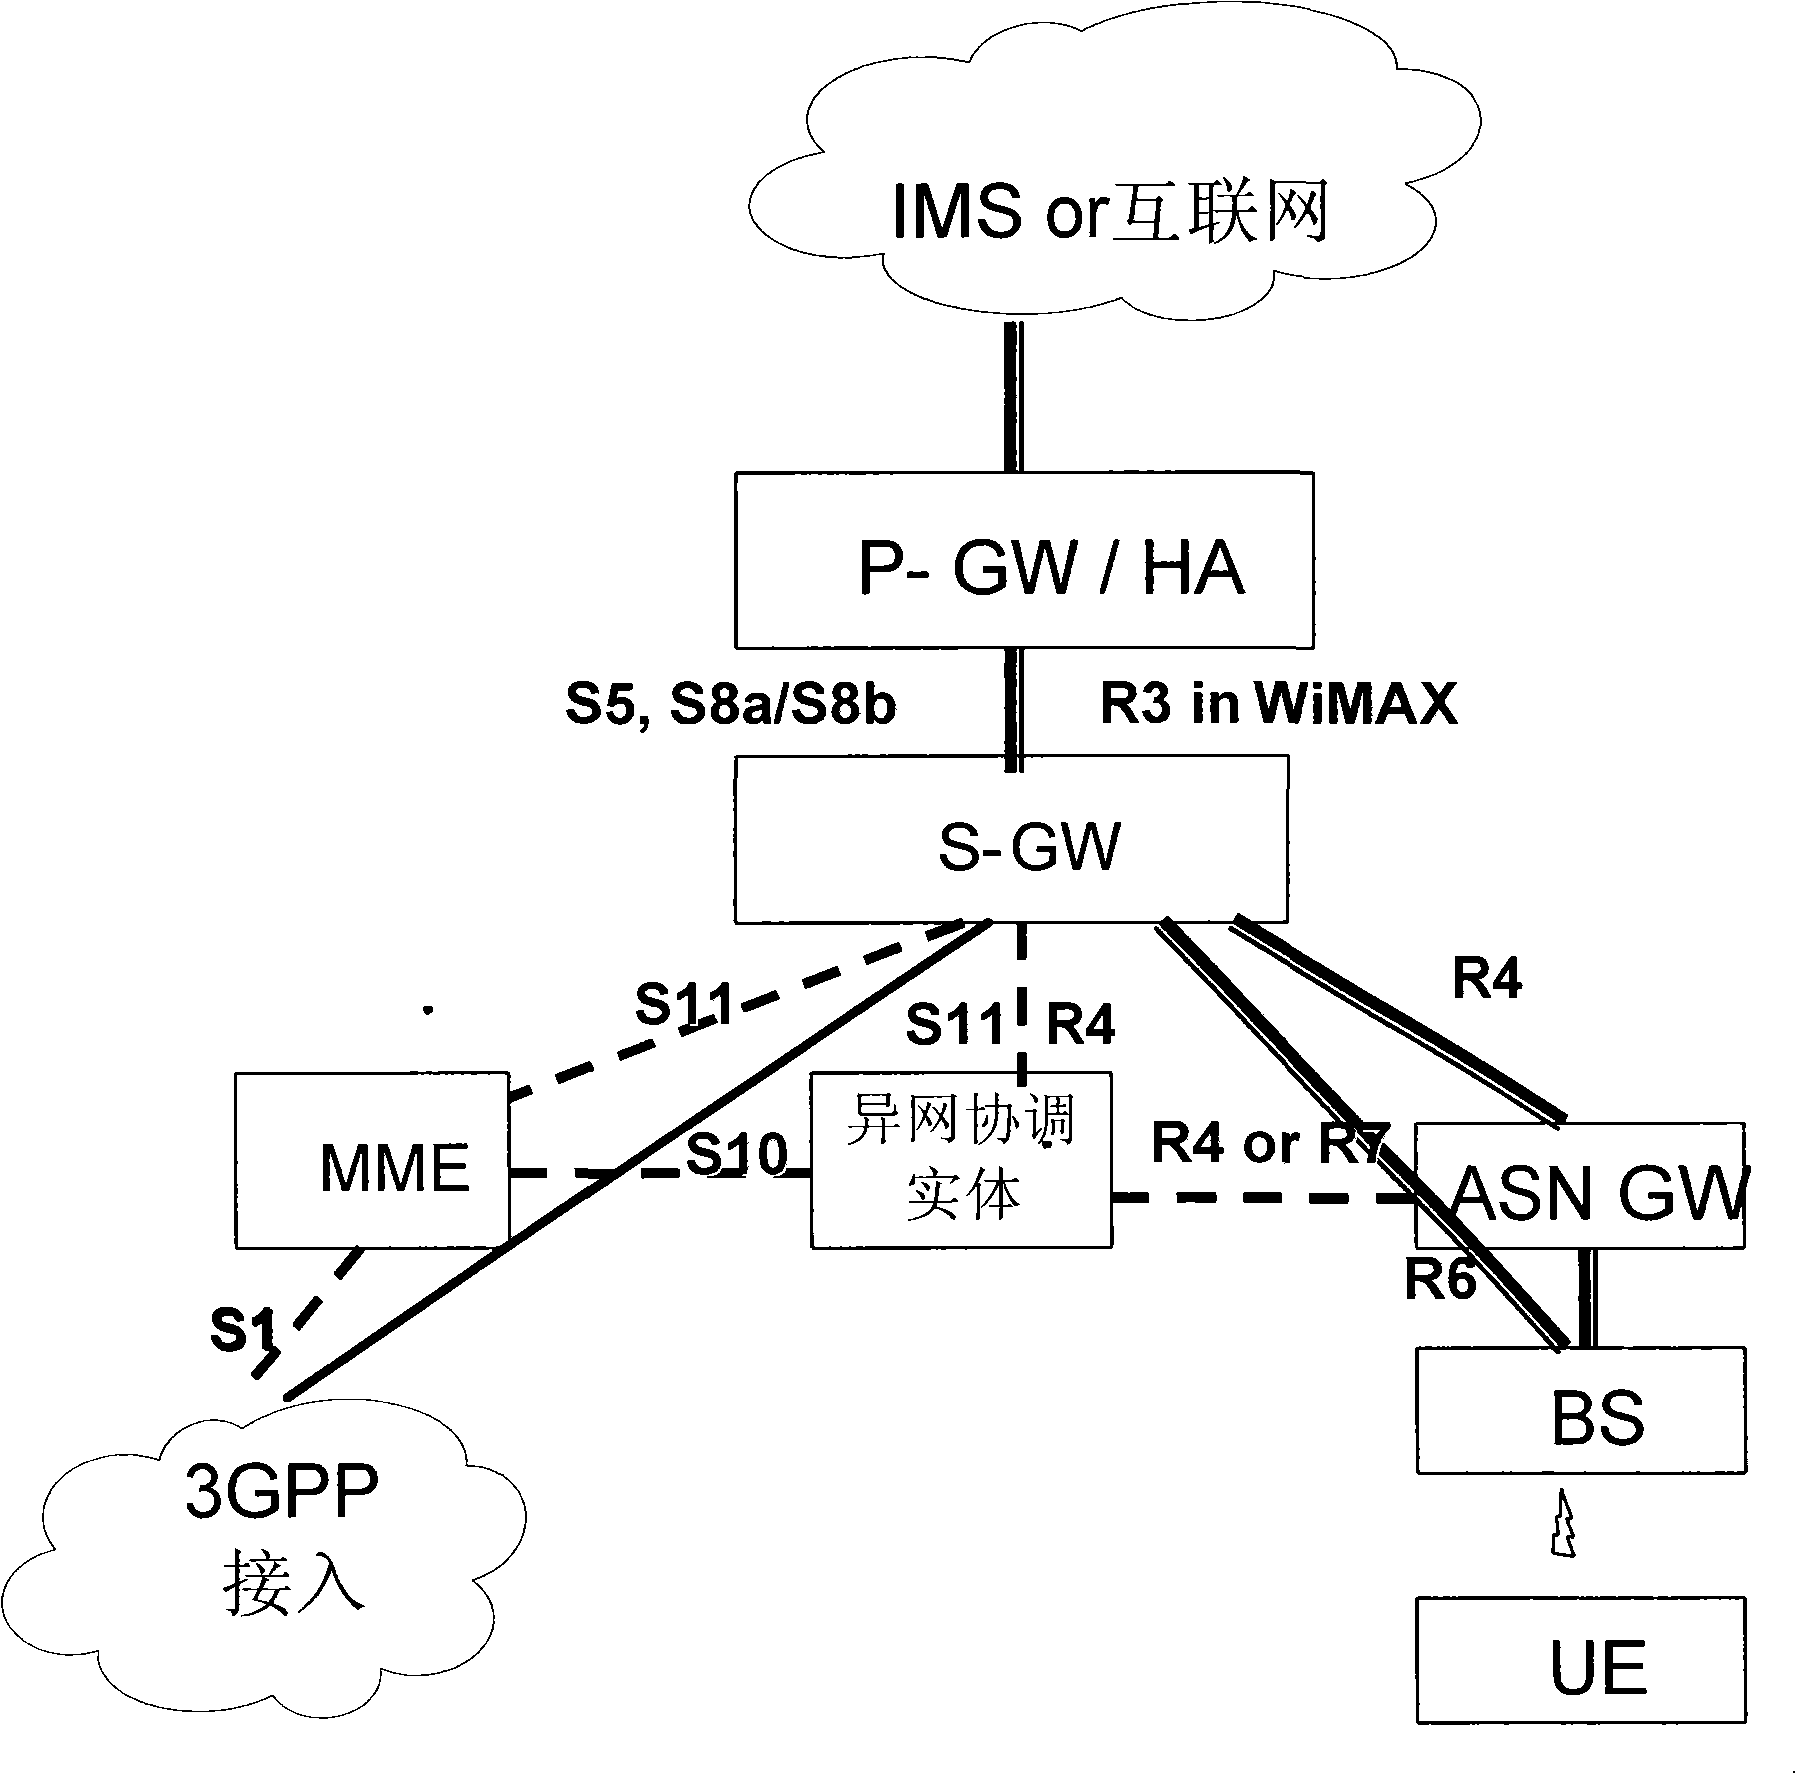 Apparatus for coordinating guiding network, wireless network as well as method for switching and attaching user equipment